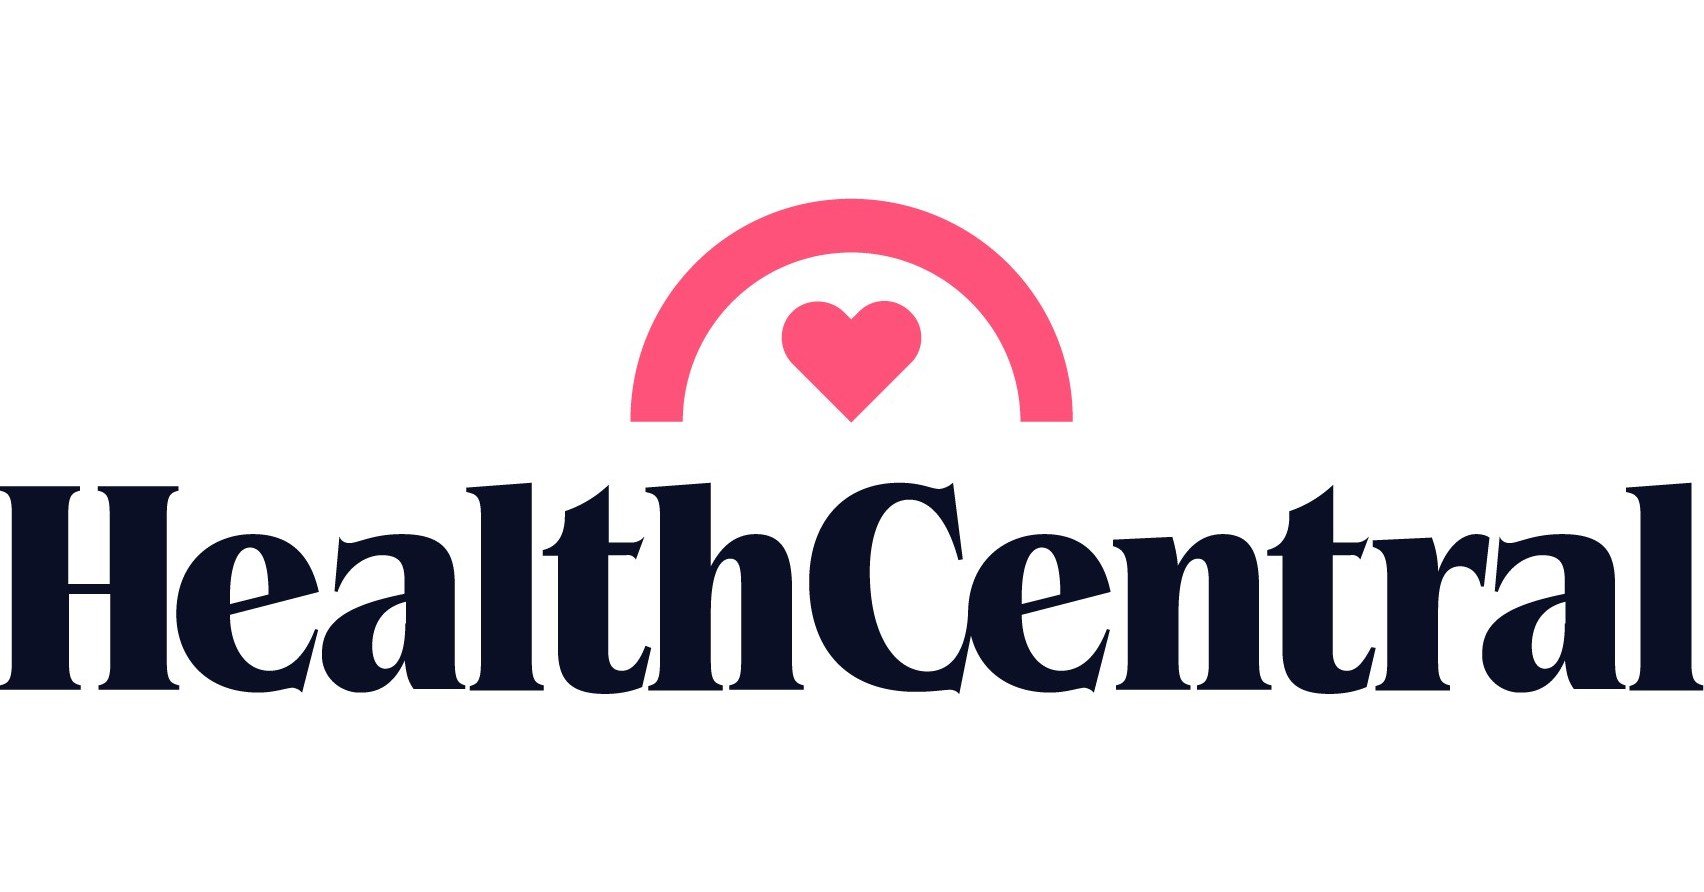 HealthCentral